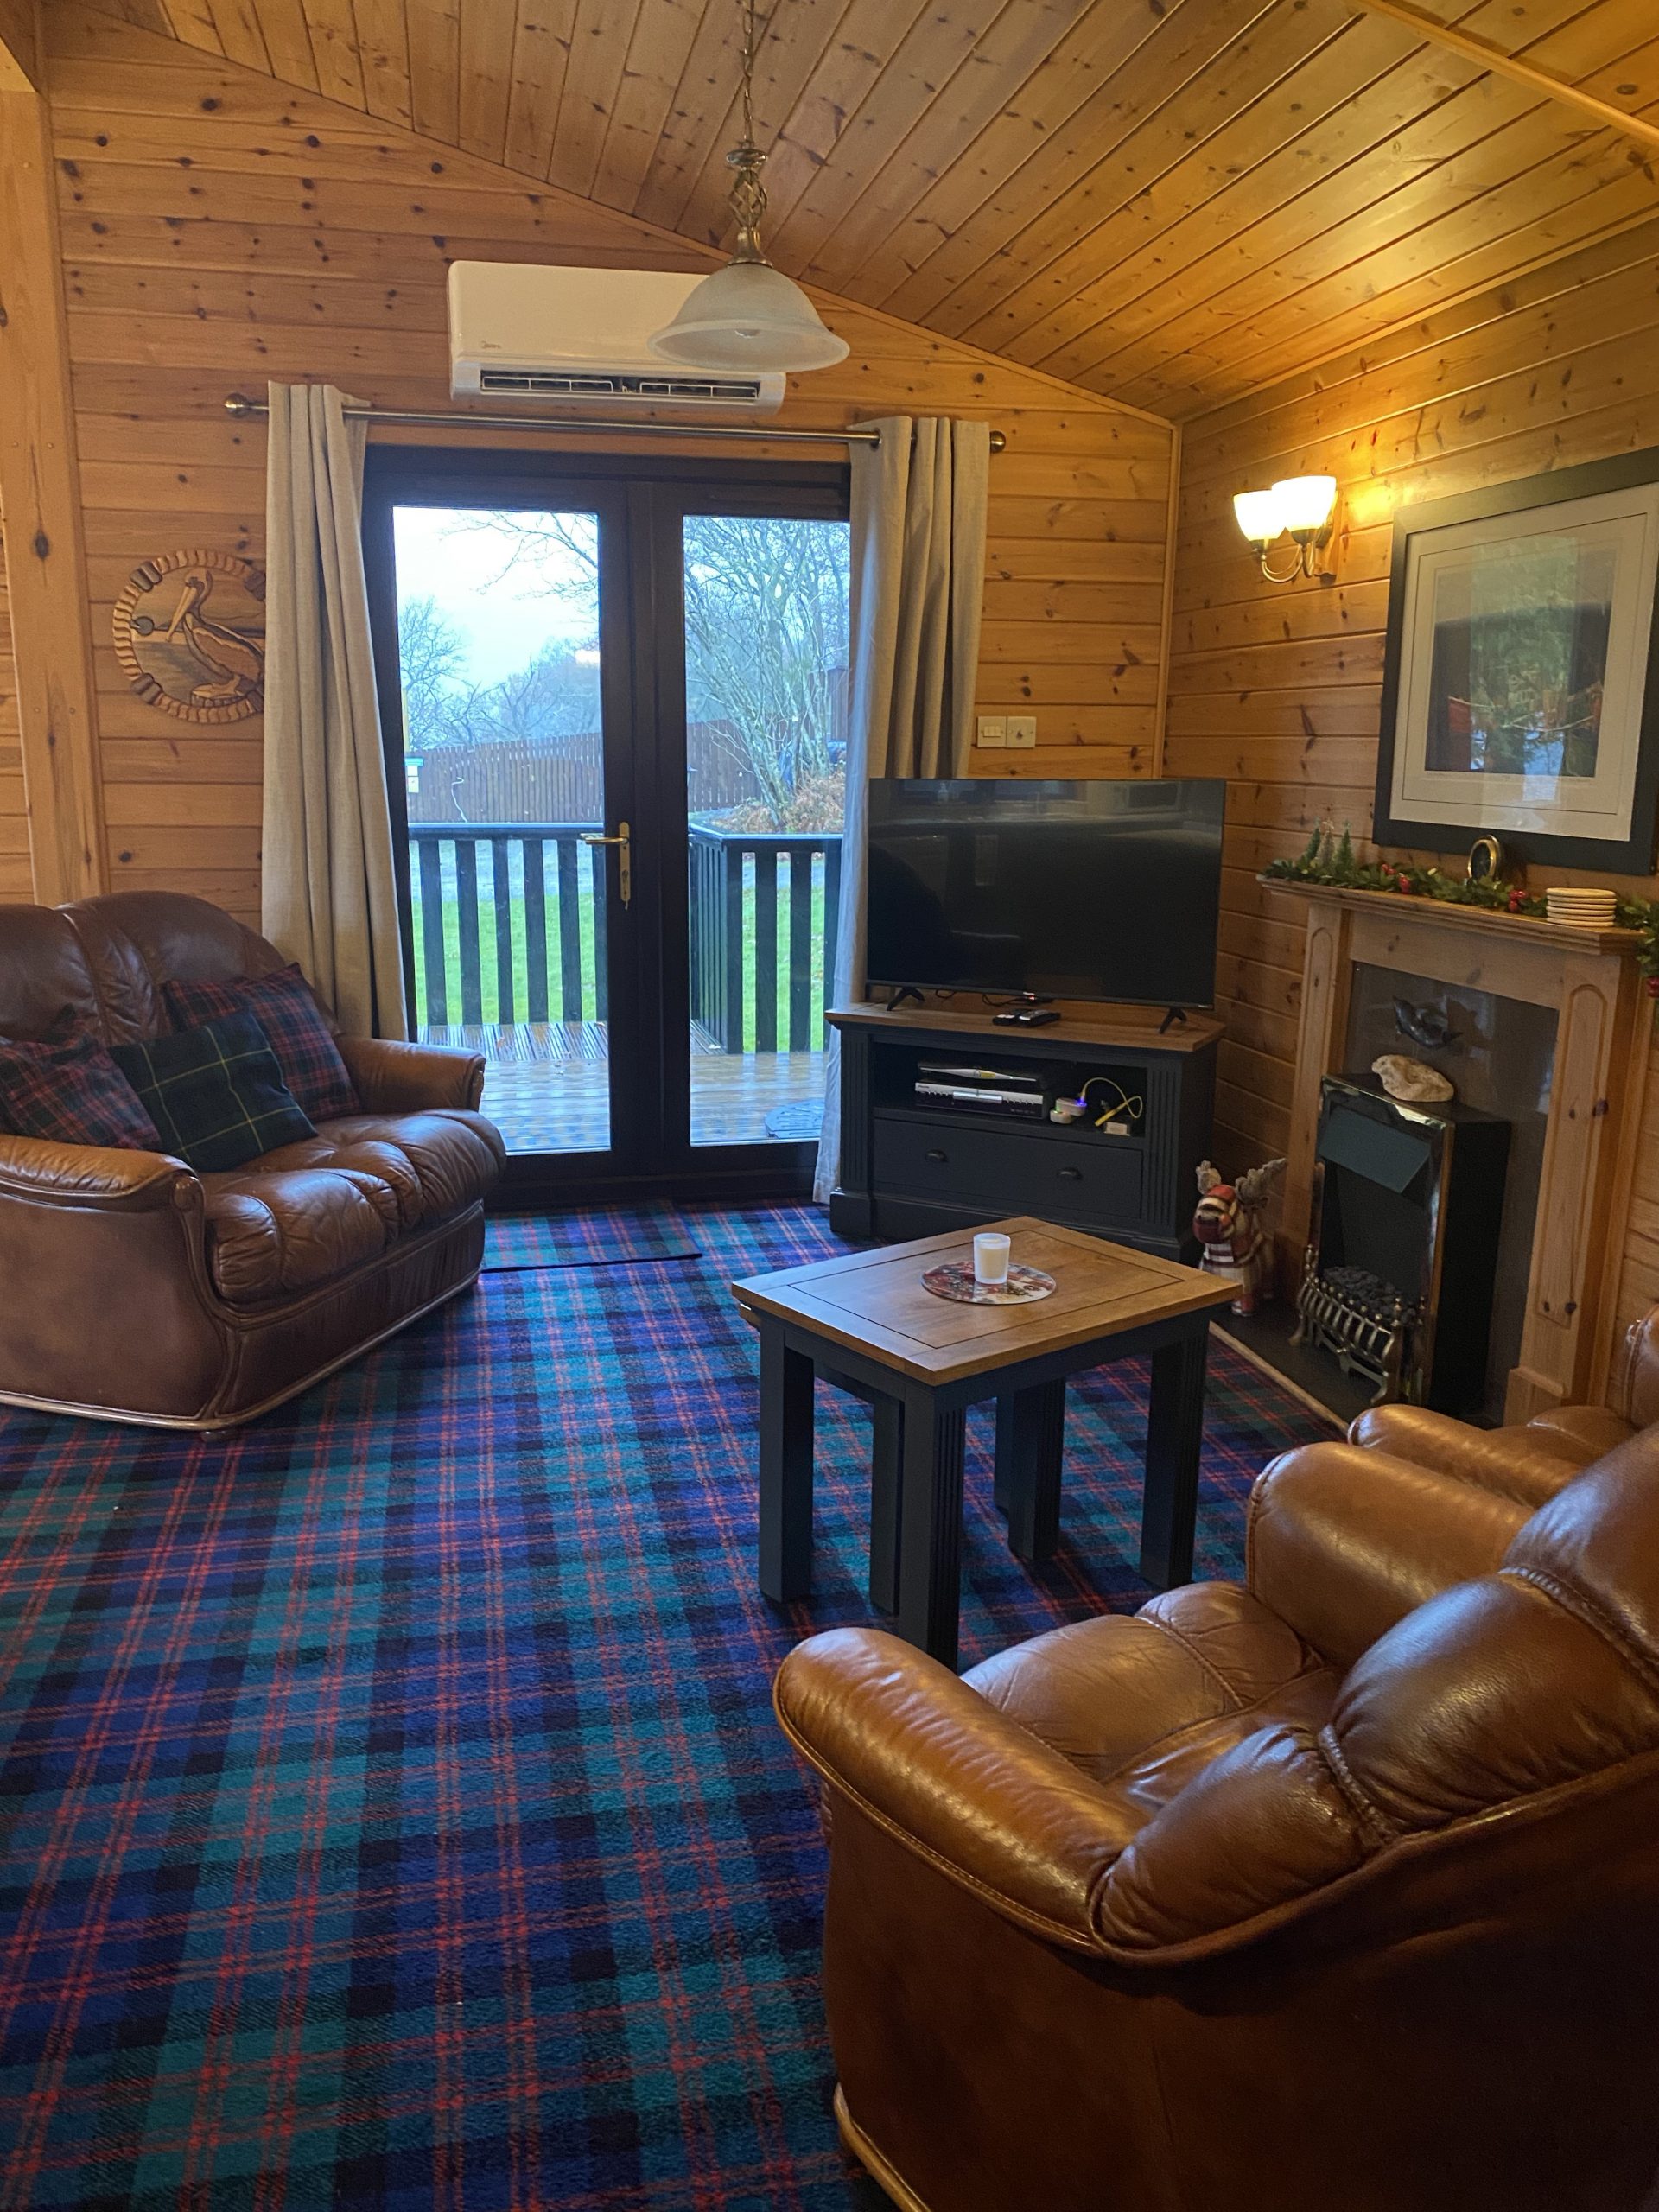 Living room with updated furniture and new TV Patio has a view of Loch Lomond. We're in Rowardennan. Visit Loch Lomond Holiday Lodge